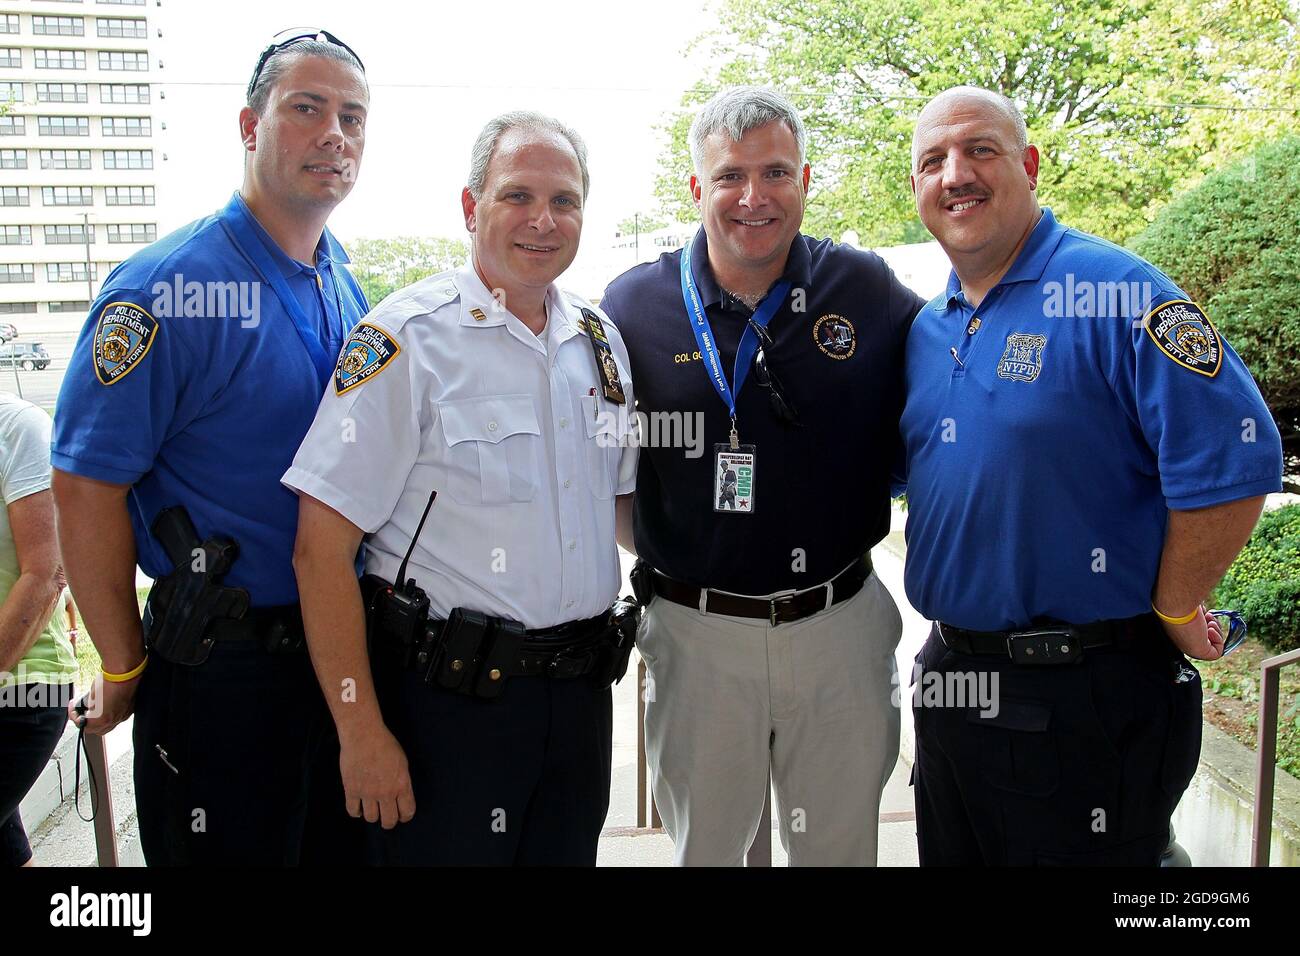 Brooklyn, NY, USA. 2. Juli 2011. NYPD PO, John Strype, (68. PCT.), NYPD Captain, Richard DiBlasio, (68tyh PCT.), Commander, US Army Garrison - Fort Hamilton Colonel, Michael J. Gould, und NYPD PO, Anthony Curran bei der Fort Hamilton Independence Day Weekend Party in Fort Hamilton. Kredit: Steve Mack/Alamy Stockfoto